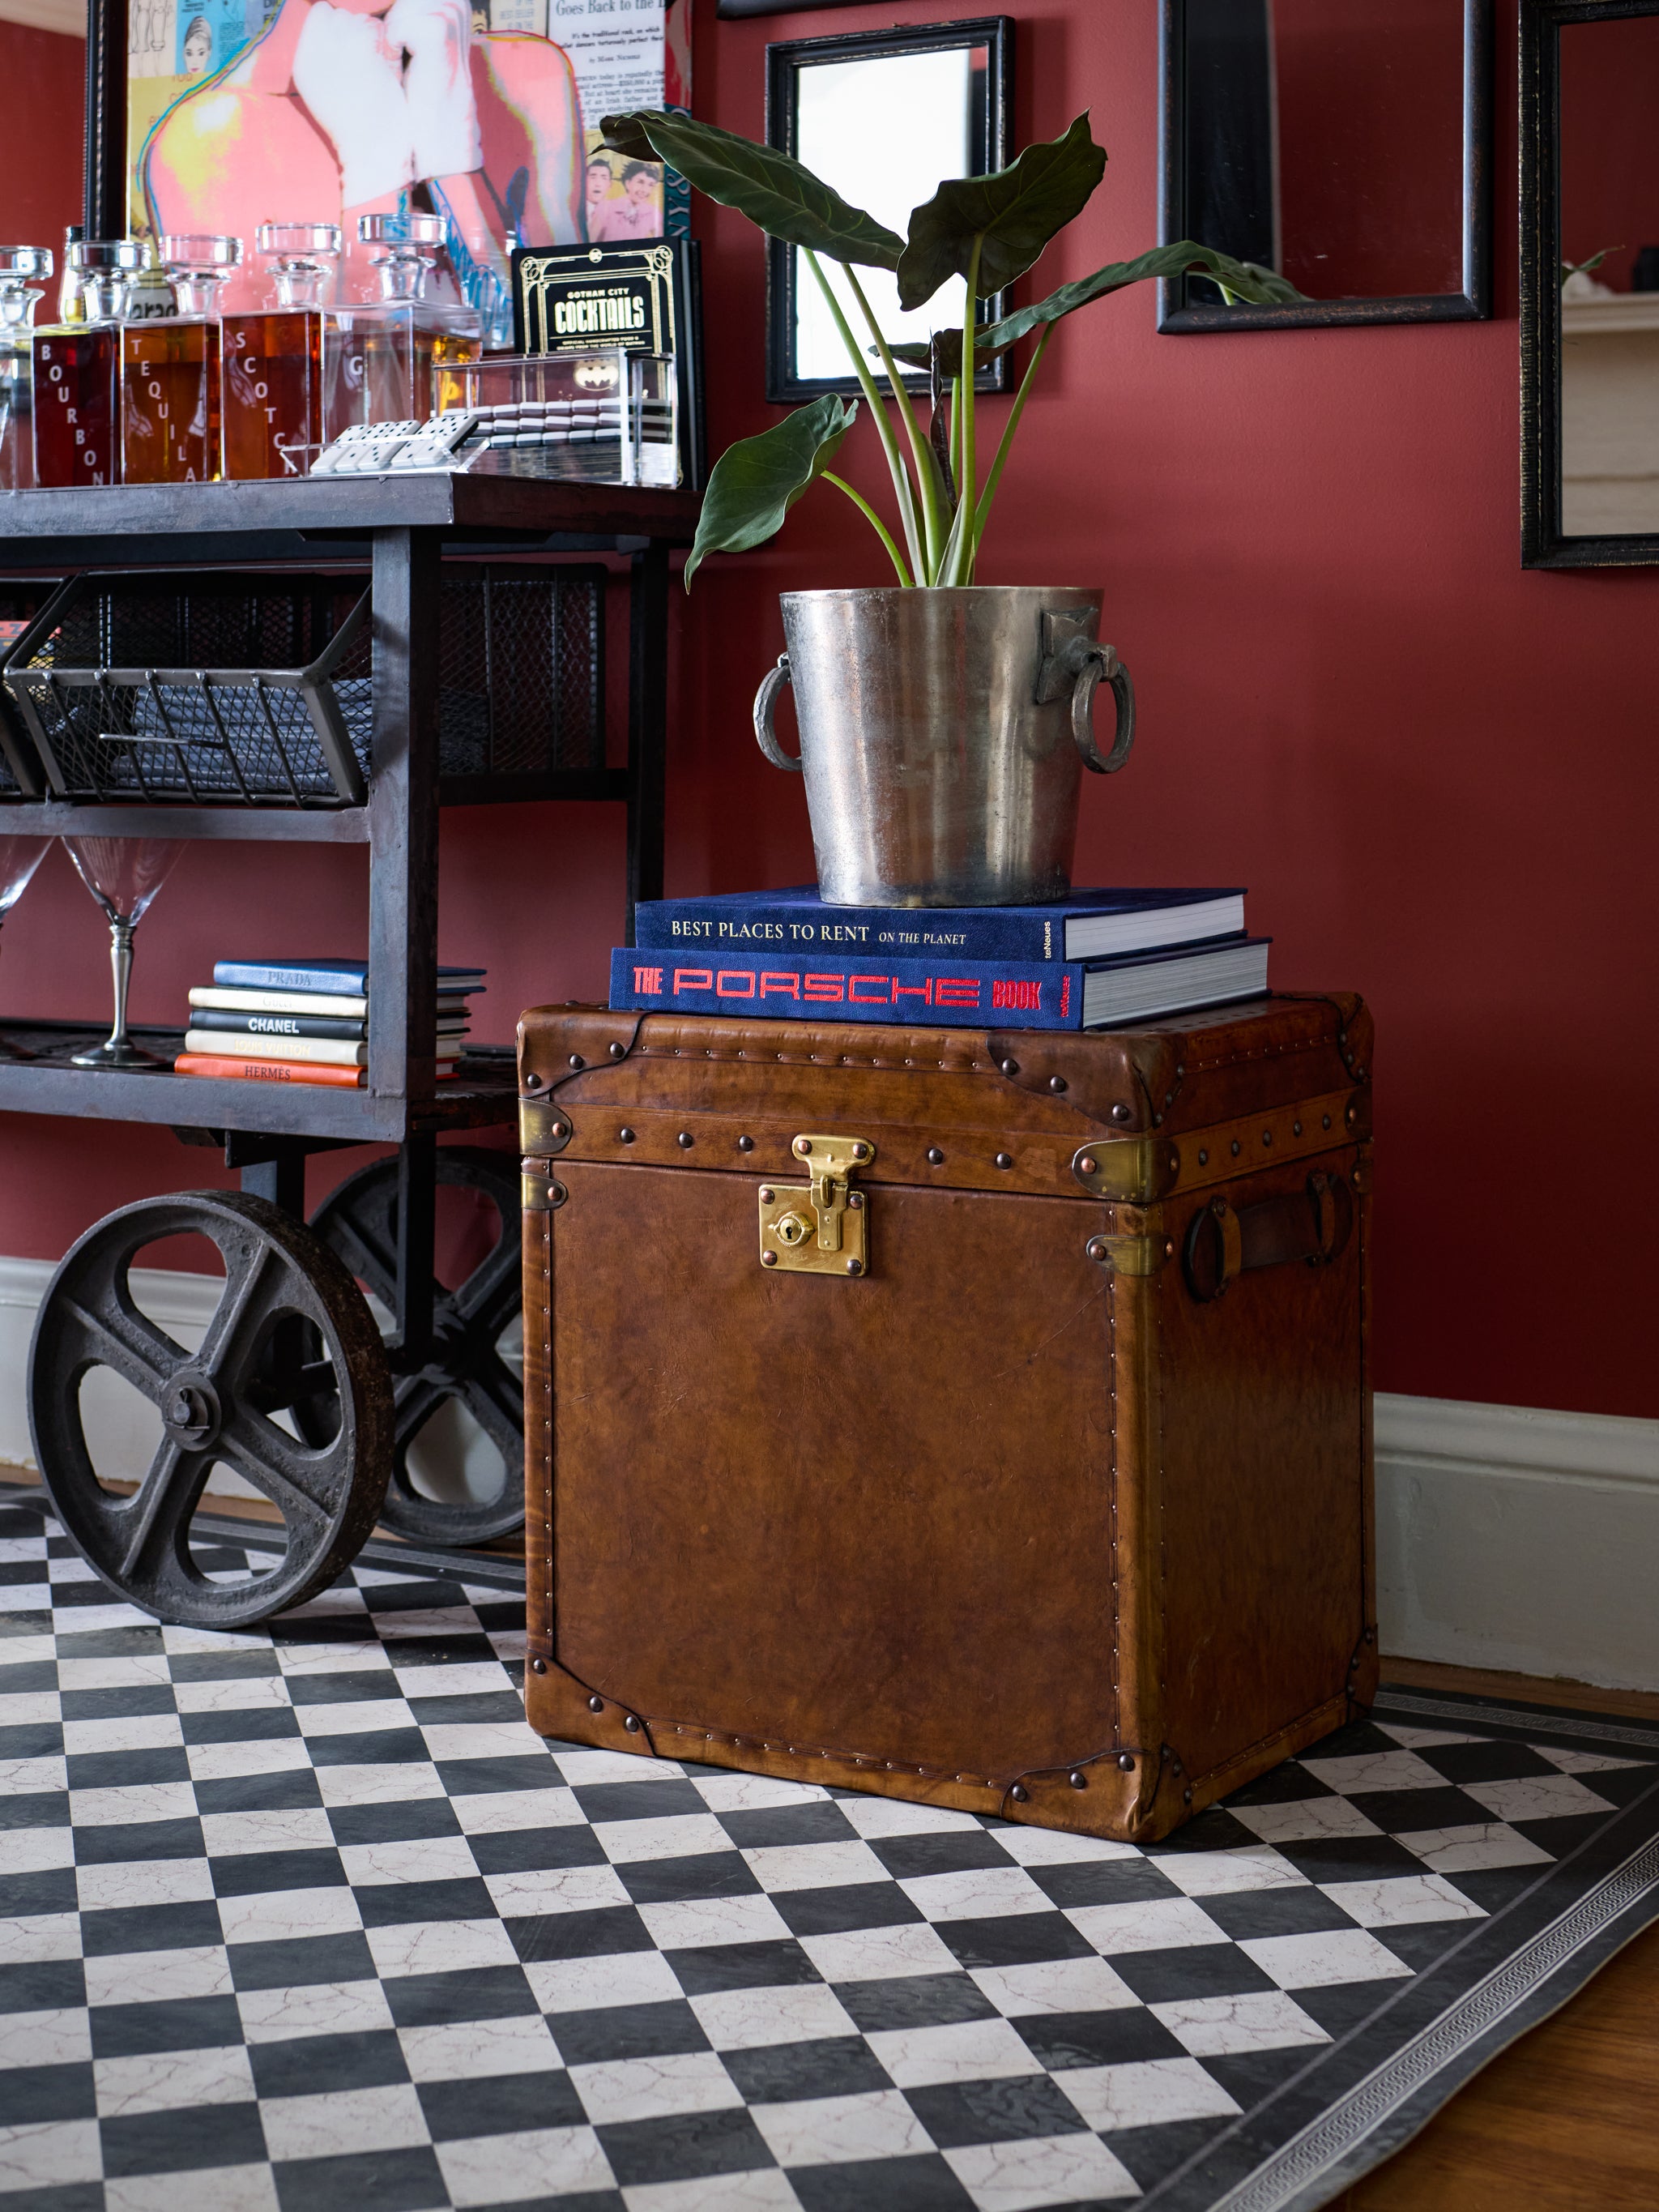 Antique Luxury Louis Vuitton Steamer Trunk/Side Table for sale at